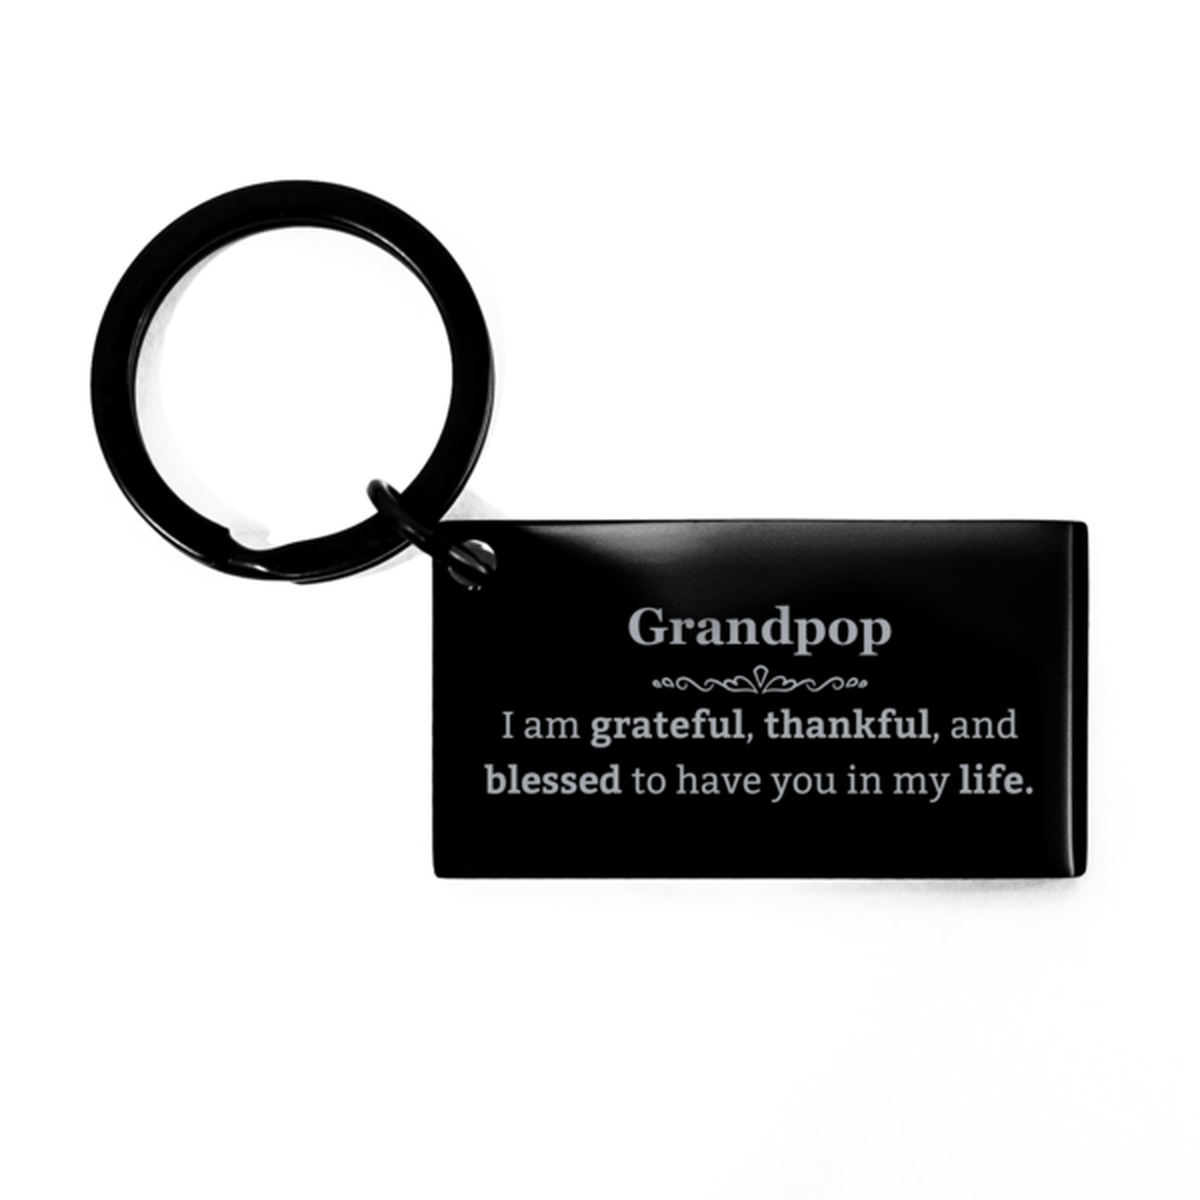 Grandpop Appreciation Gifts, I am grateful, thankful, and blessed, Thank You Keychain for Grandpop, Birthday Inspiration Gifts for Grandpop